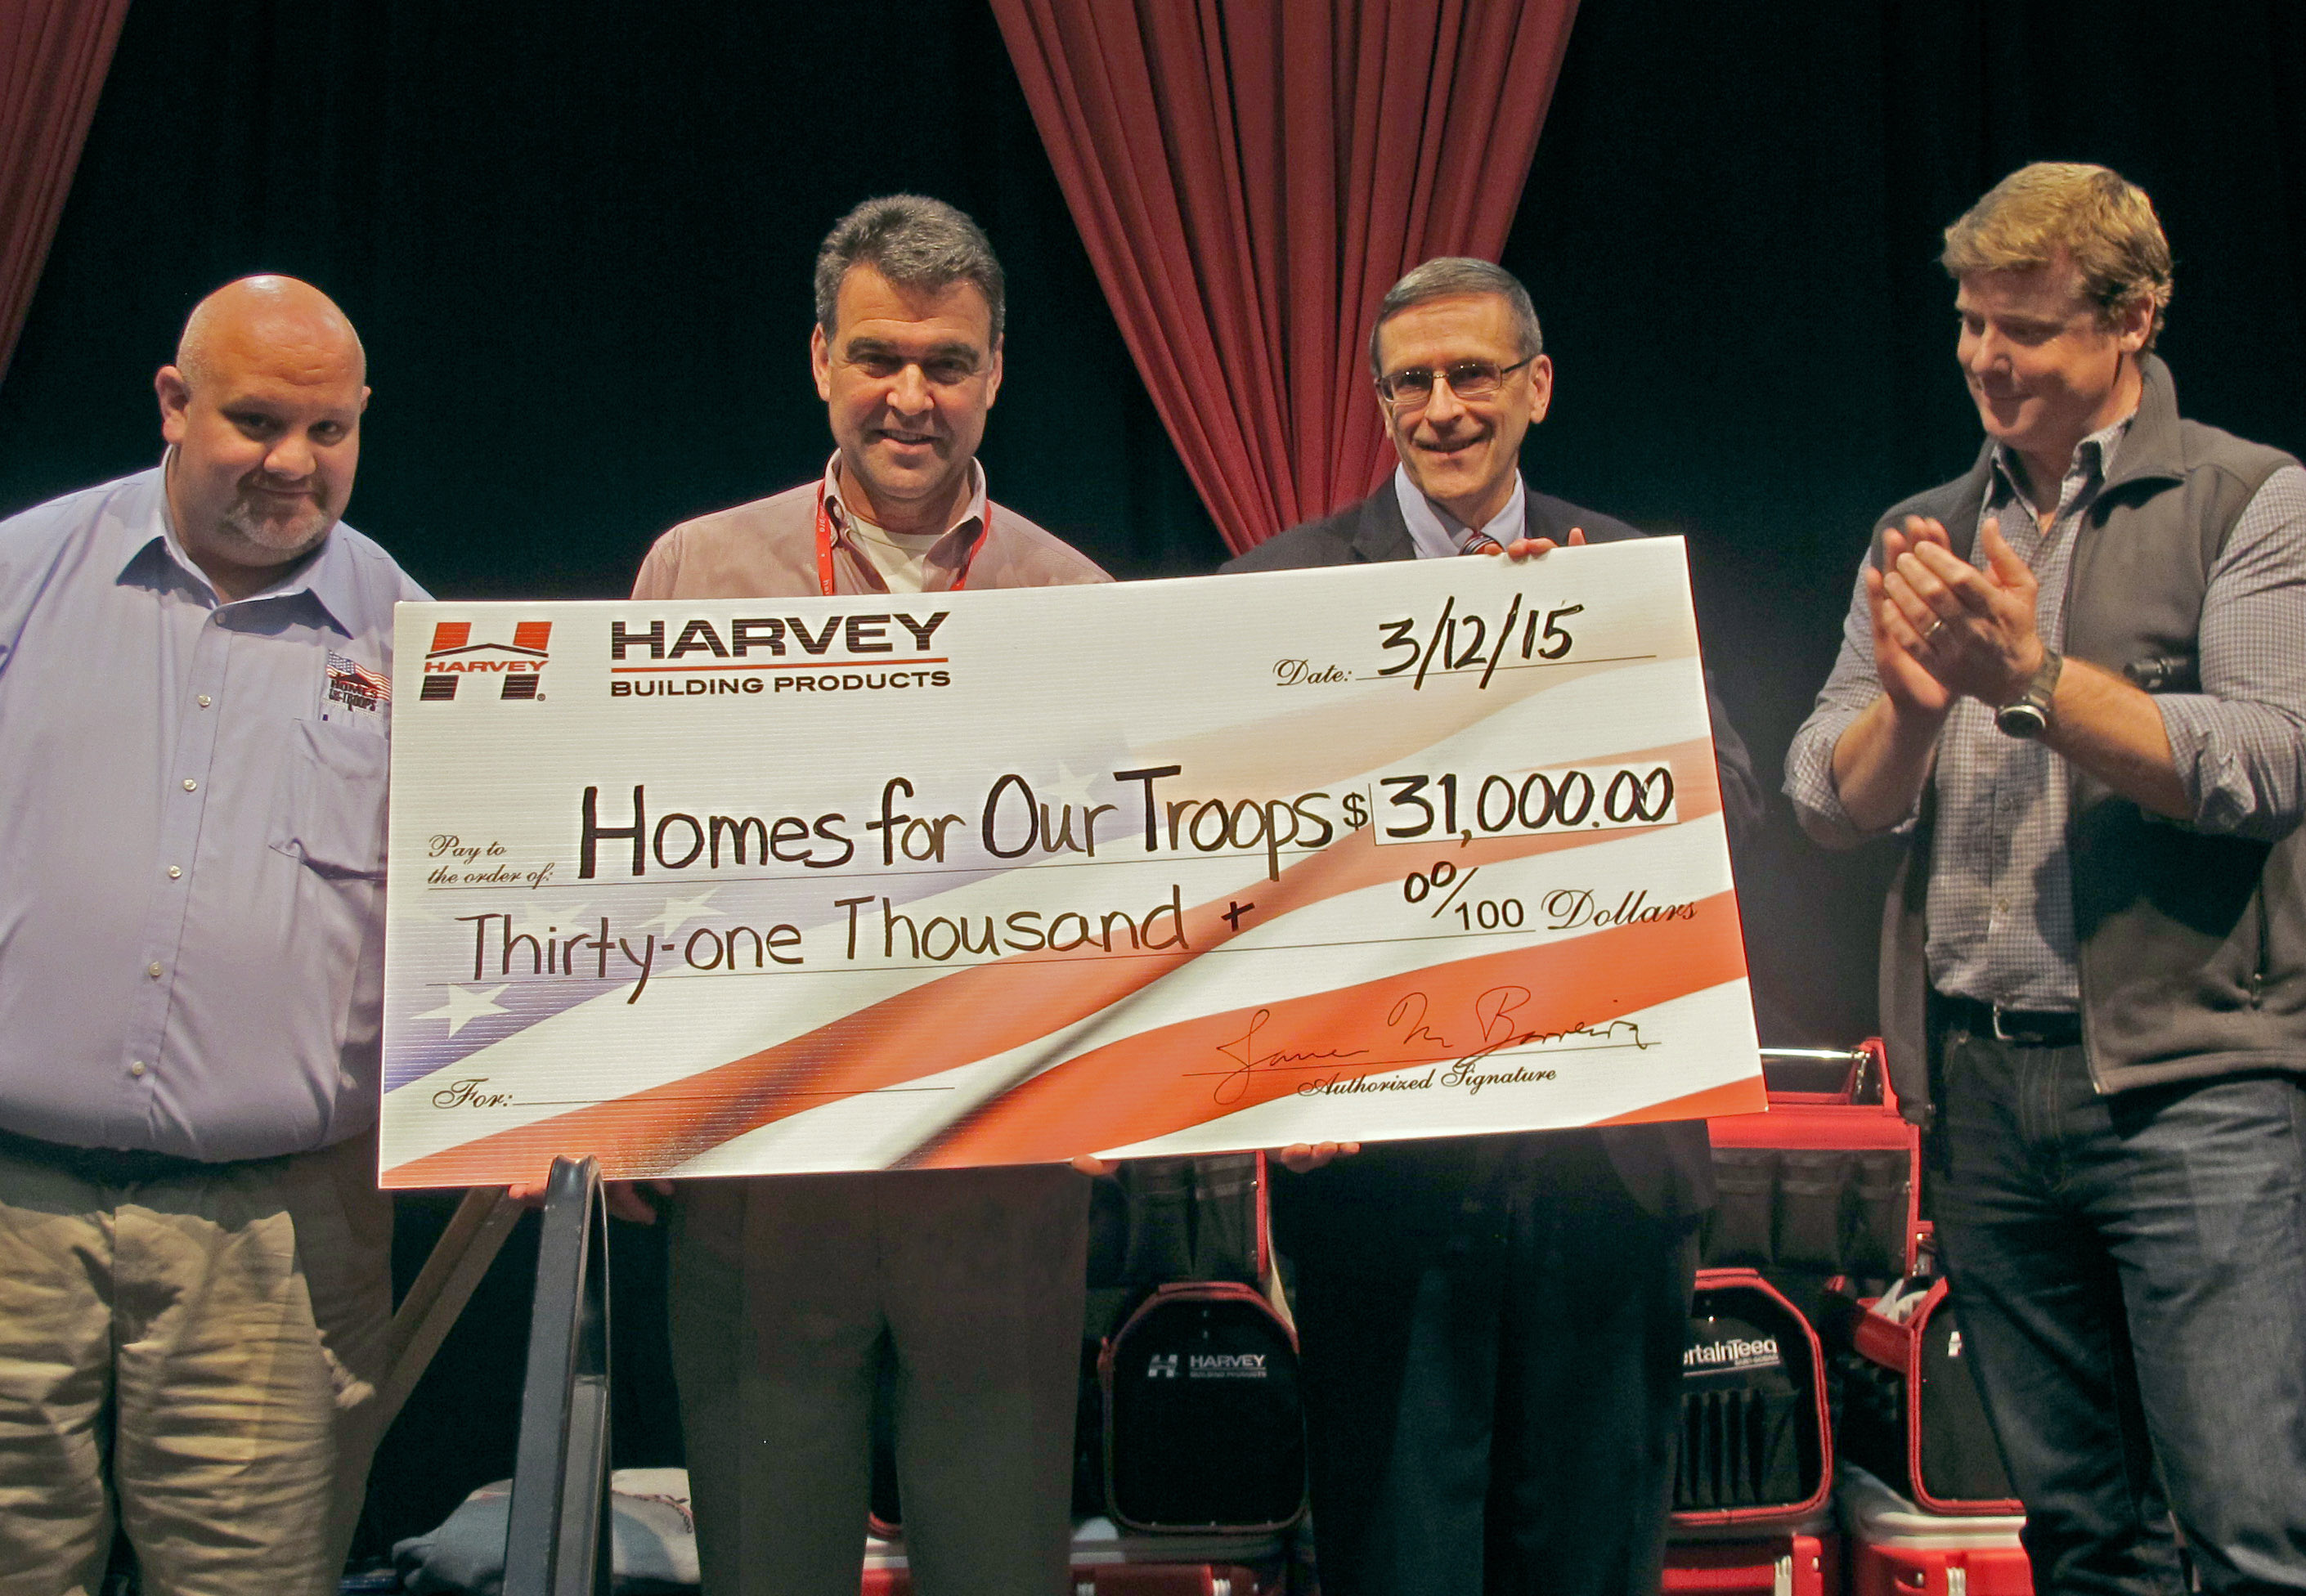 Harvey's president, Jim Barreira, presents $31,000 to Homes for Our Troops